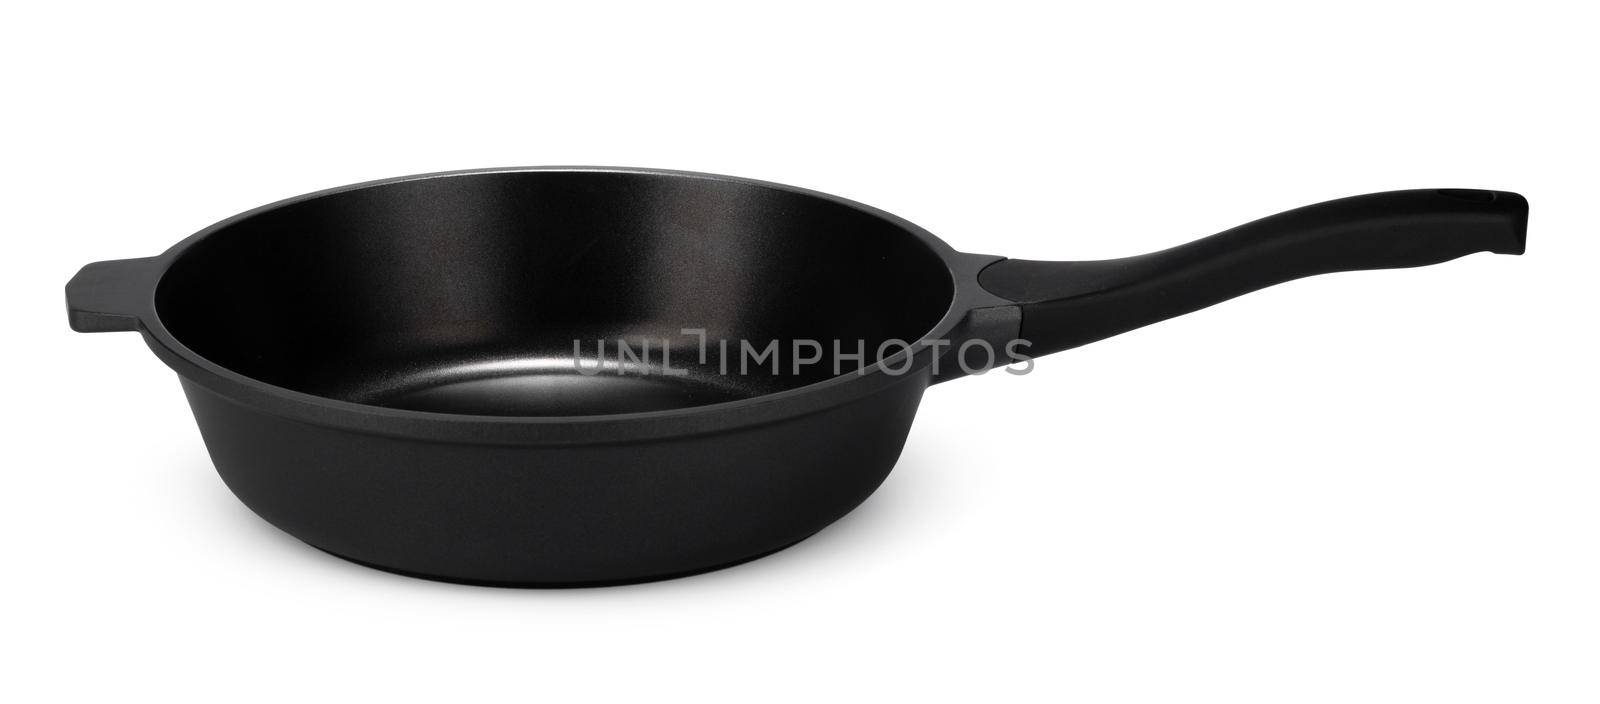 New black frying pan isolated on white background by Fabrikasimf